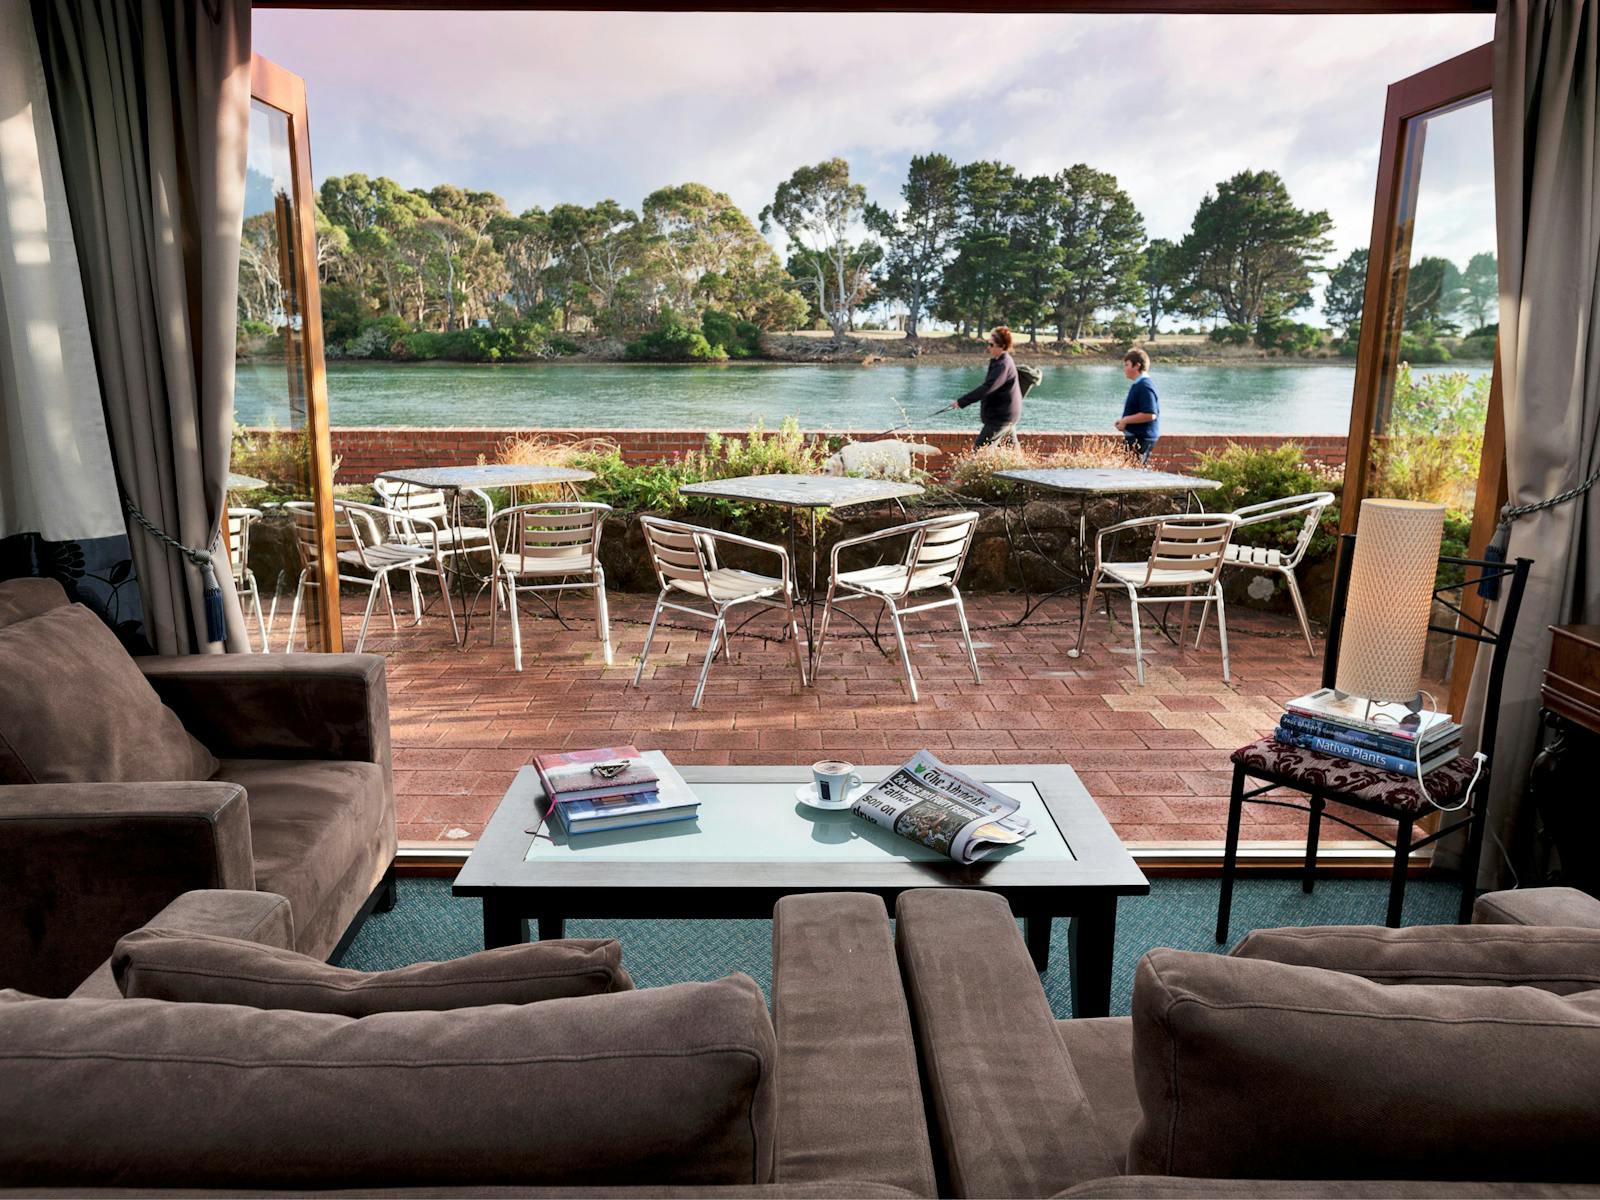 View of the aqua Inglis river from inside the guest lounge, looking out at people walking by.